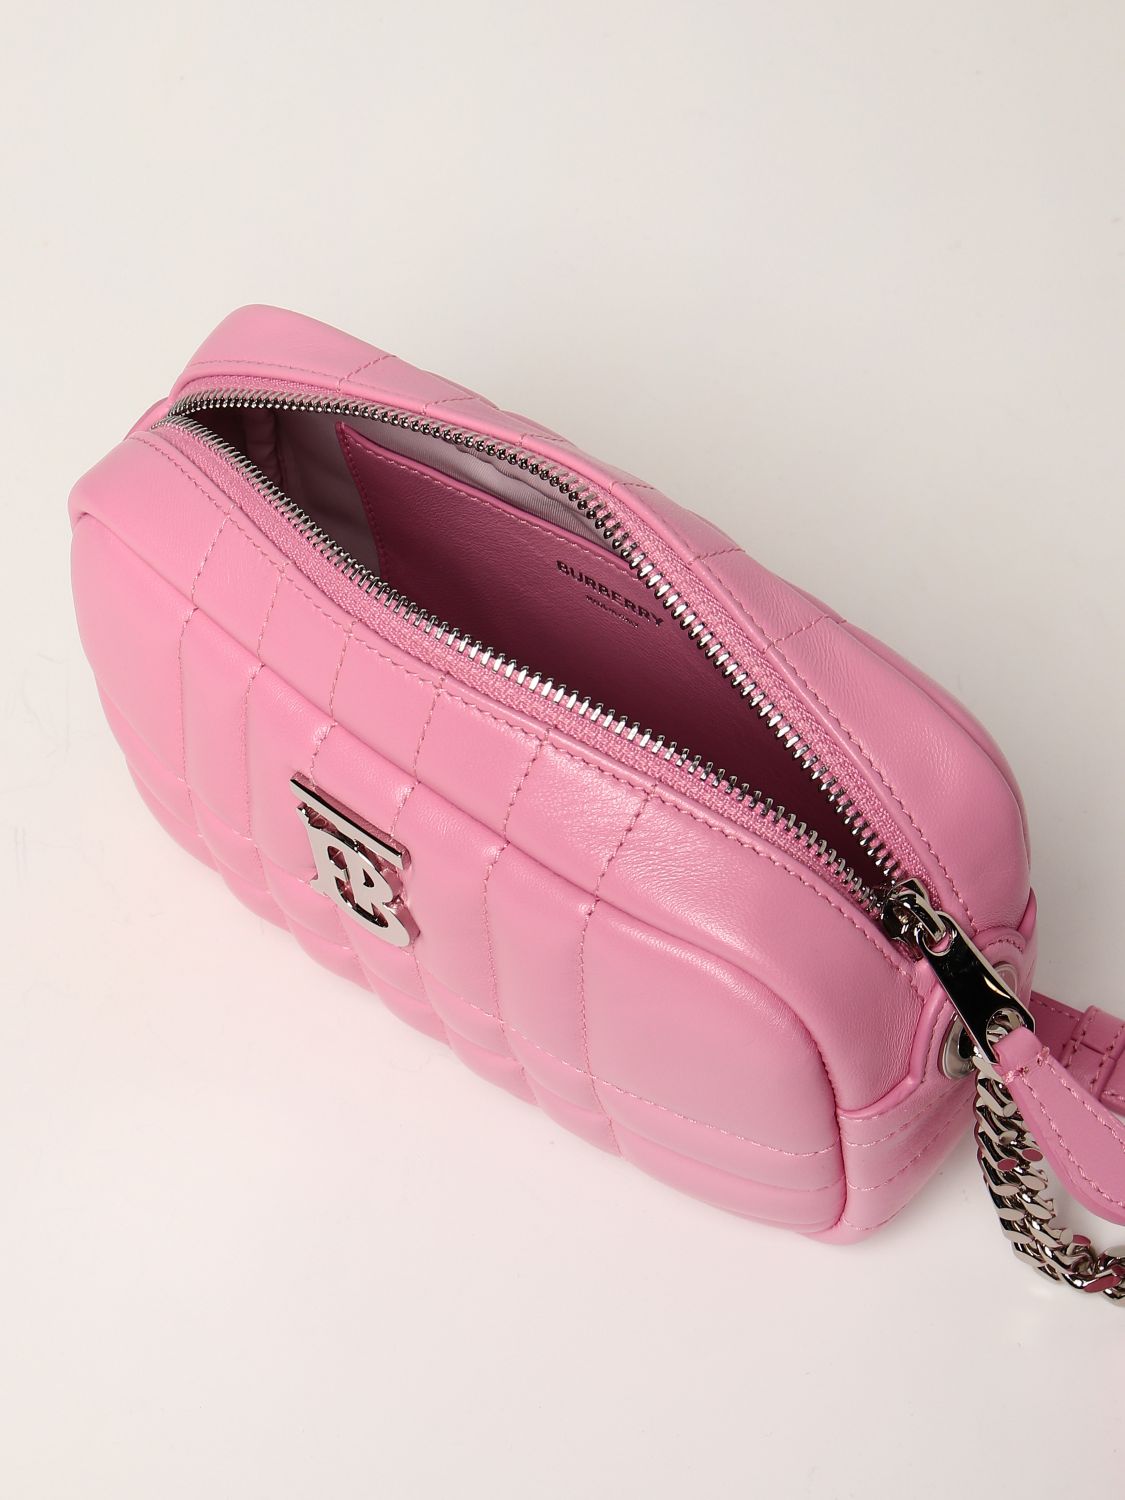 Cross body bags Burberry - Quilted Lola bag in pink - 8023889